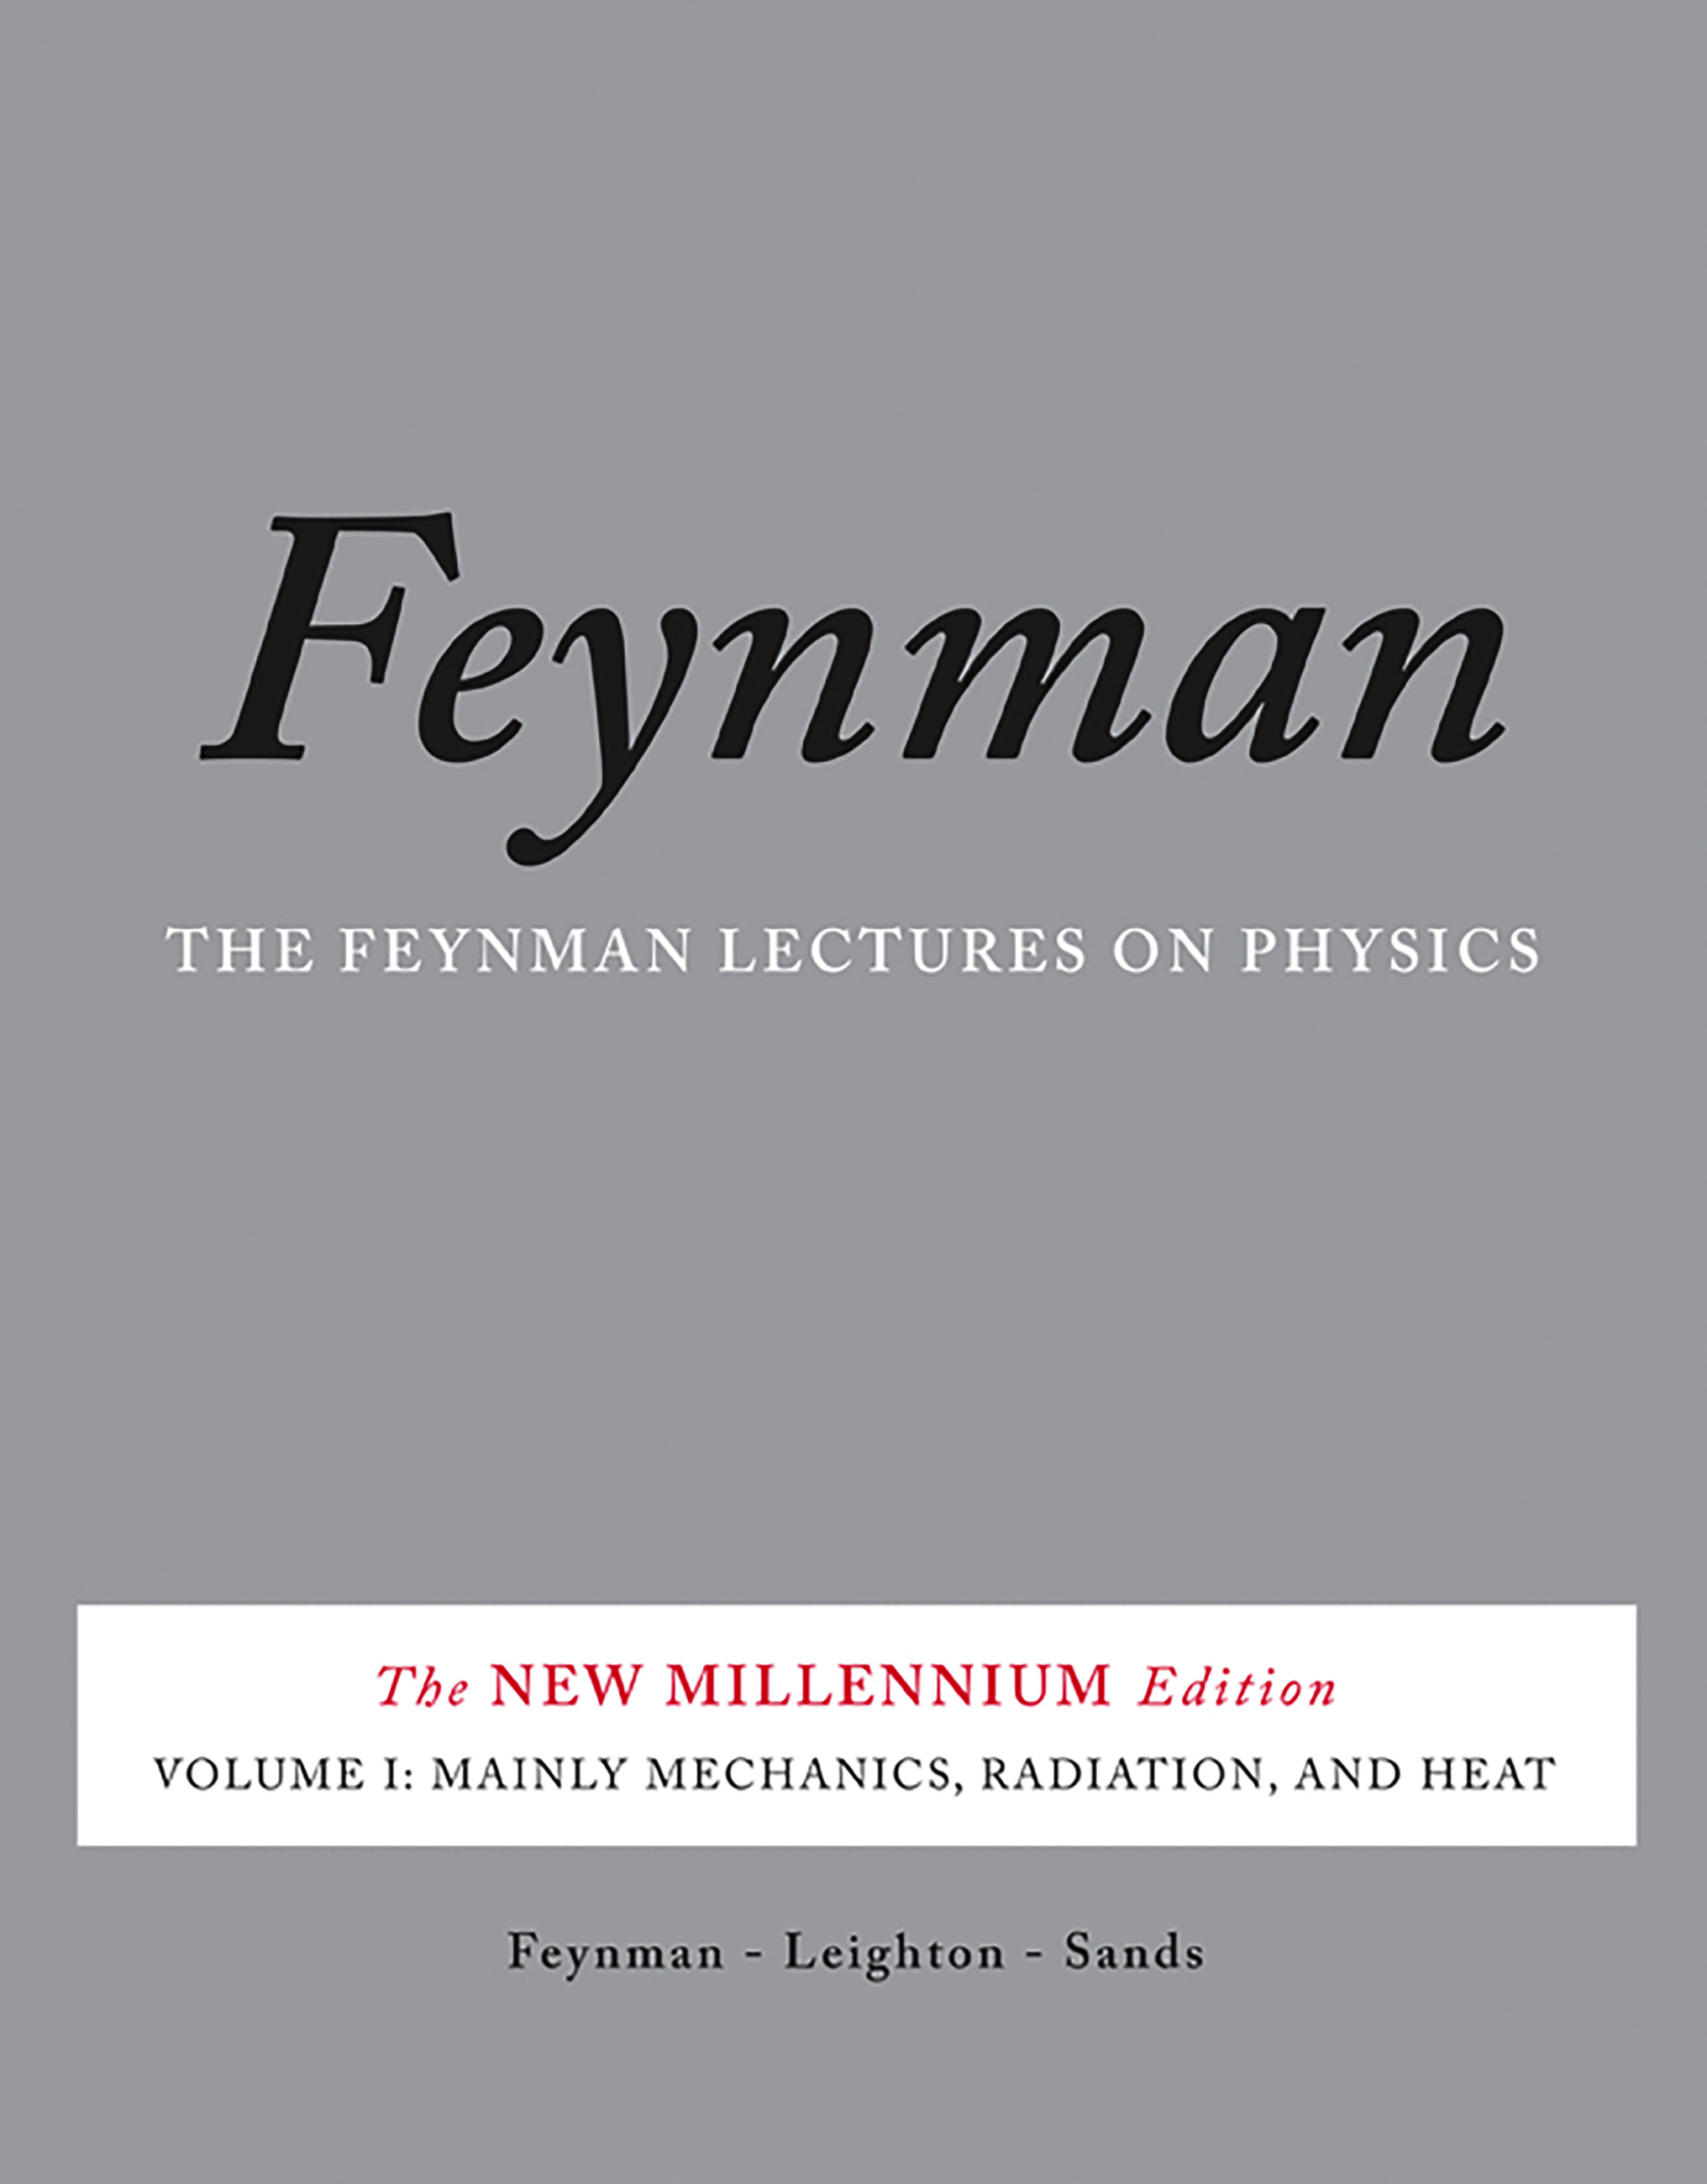 Book　Feynman　by　The　P.　Vol.　Physics,　Hachette　Lectures　I　Feynman　on　Richard　Group